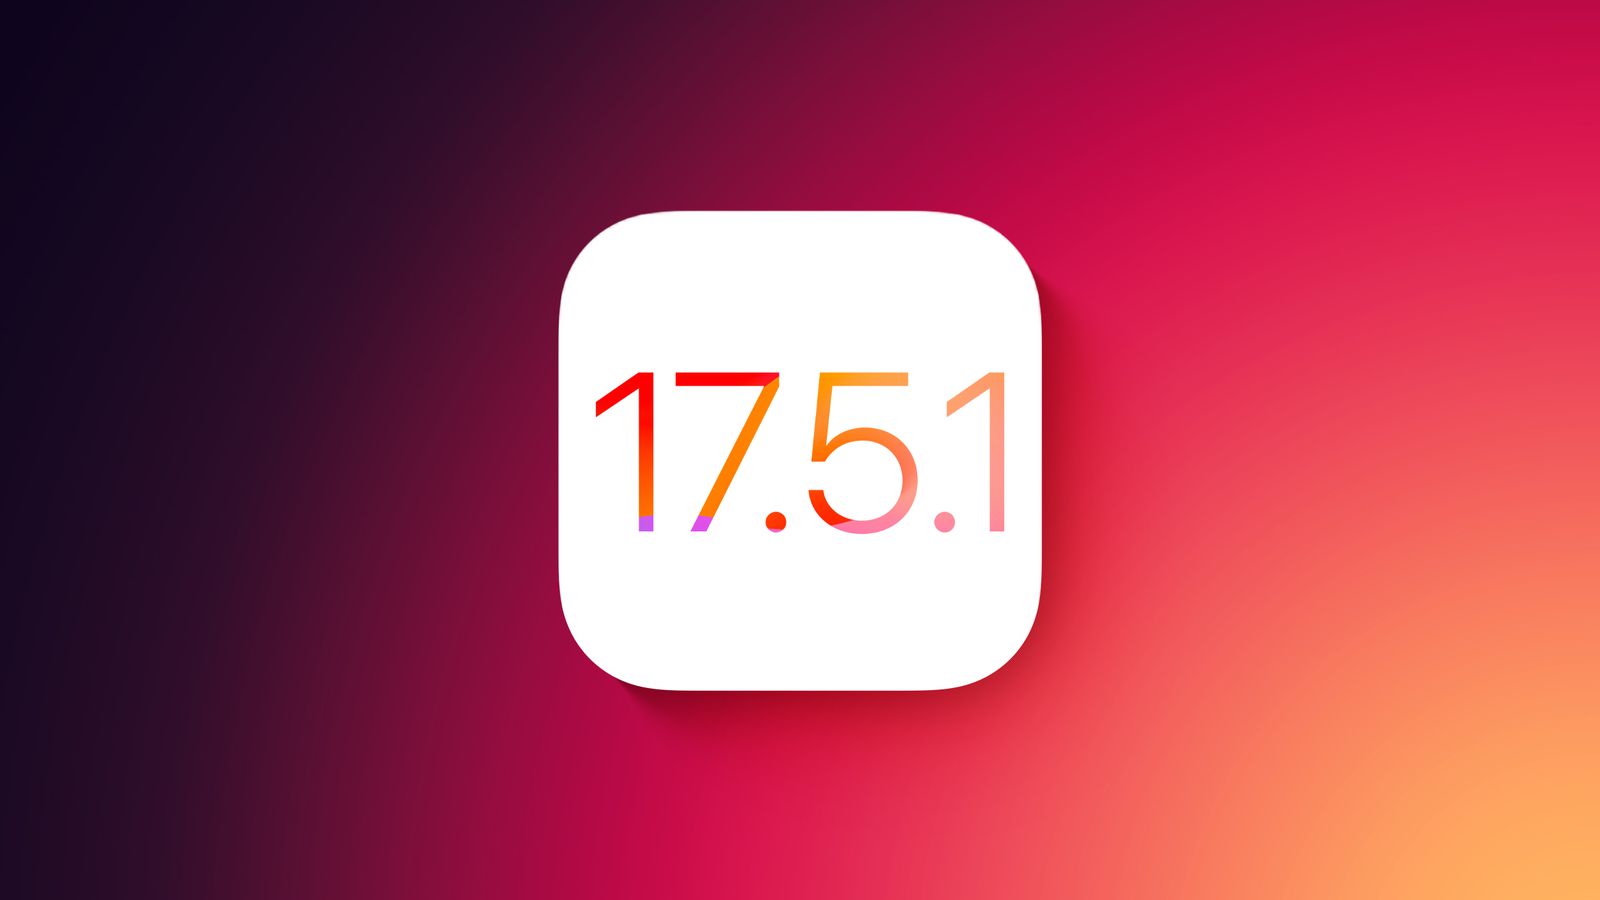 Apple has released iOS 17.5.1 update for iPhone, fixing an issue with deleted photos